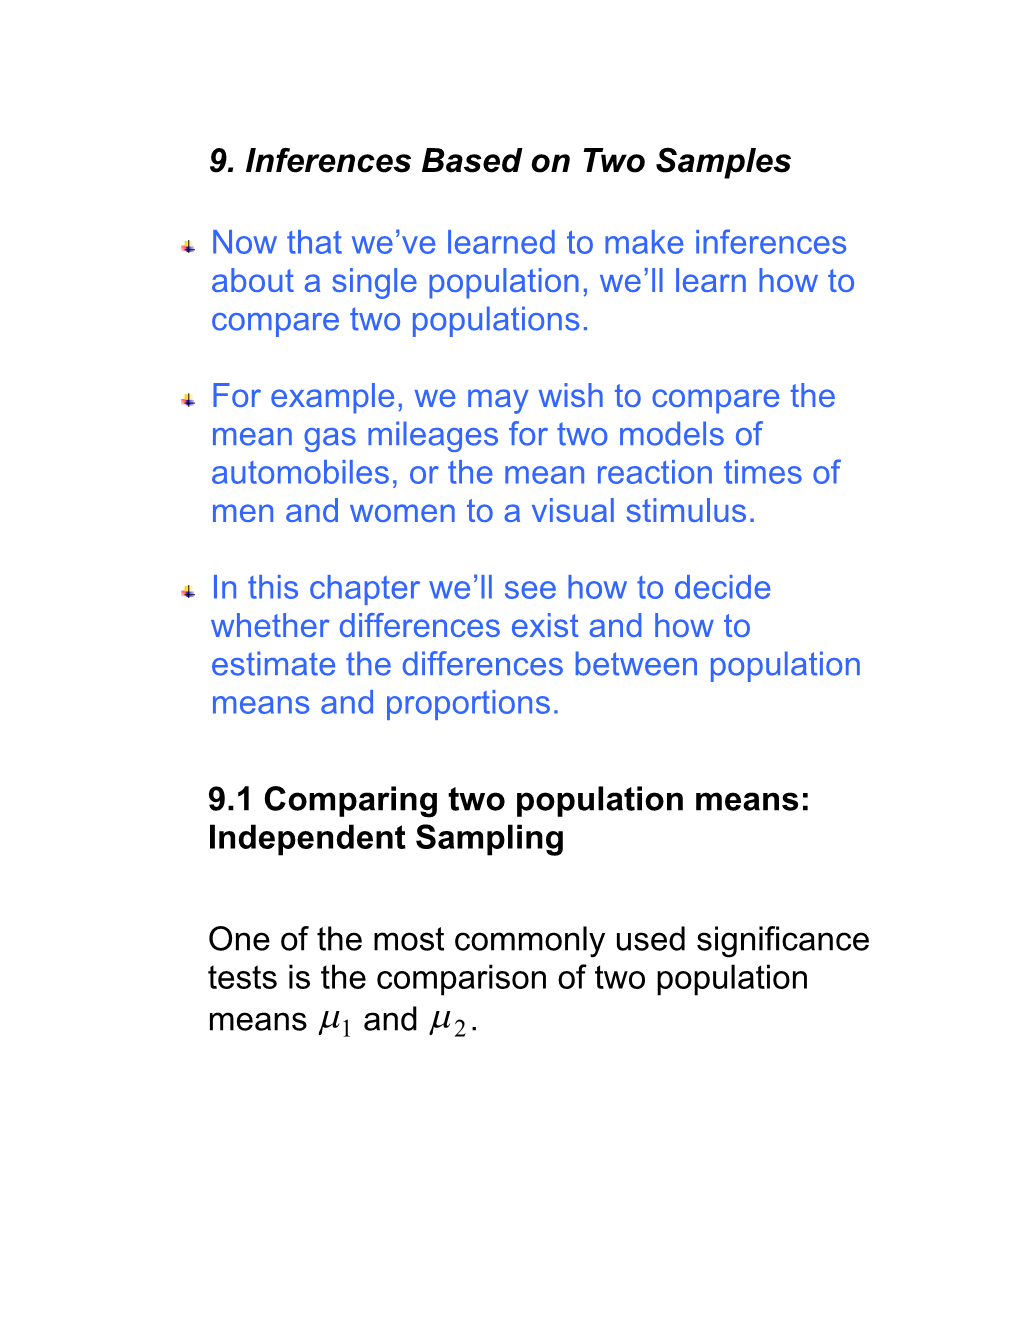 9. Inferences Based on Two Samples